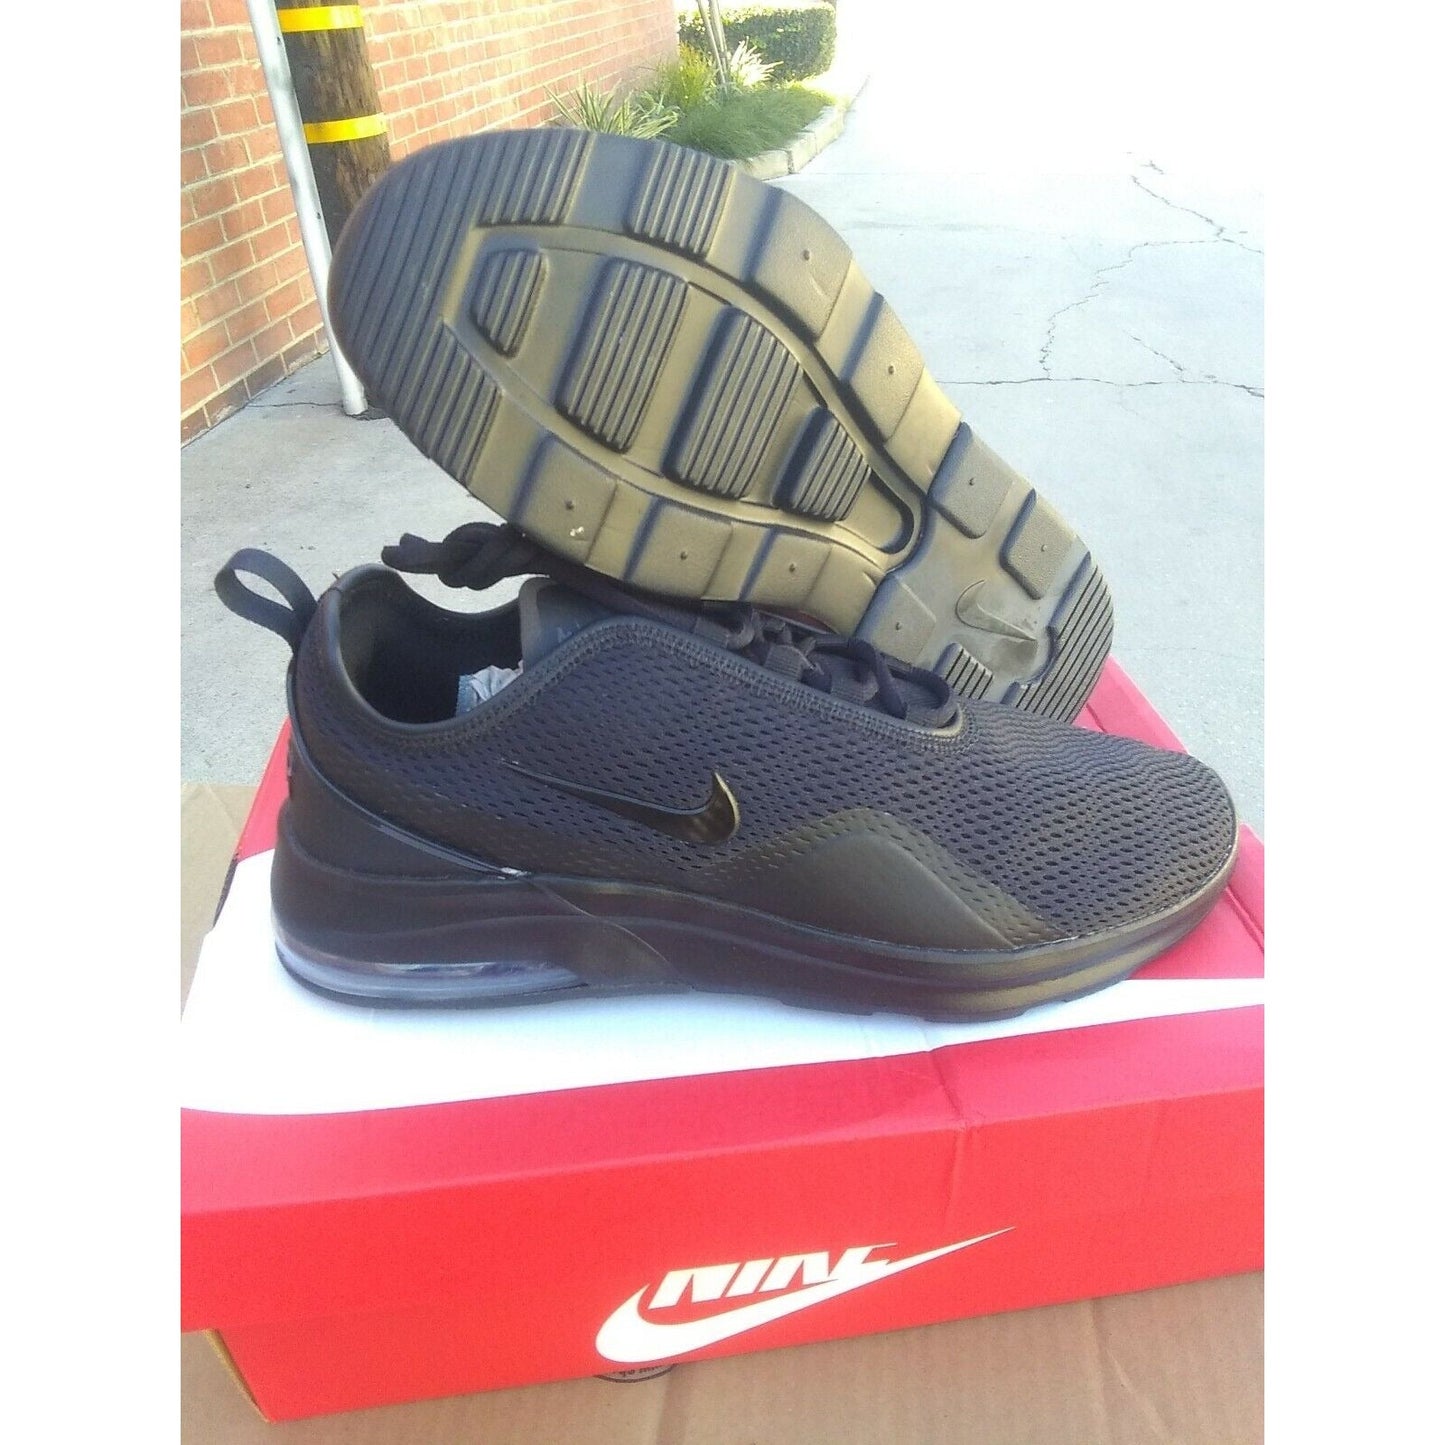 Nike Air Max Motion 2 Men's Running Shoes Size 13 US - Classic Fashion DealsNike Air Max Motion 2 Men's Running Shoes Size 13 USAthletic ShoesNikeClassic Fashion Deals